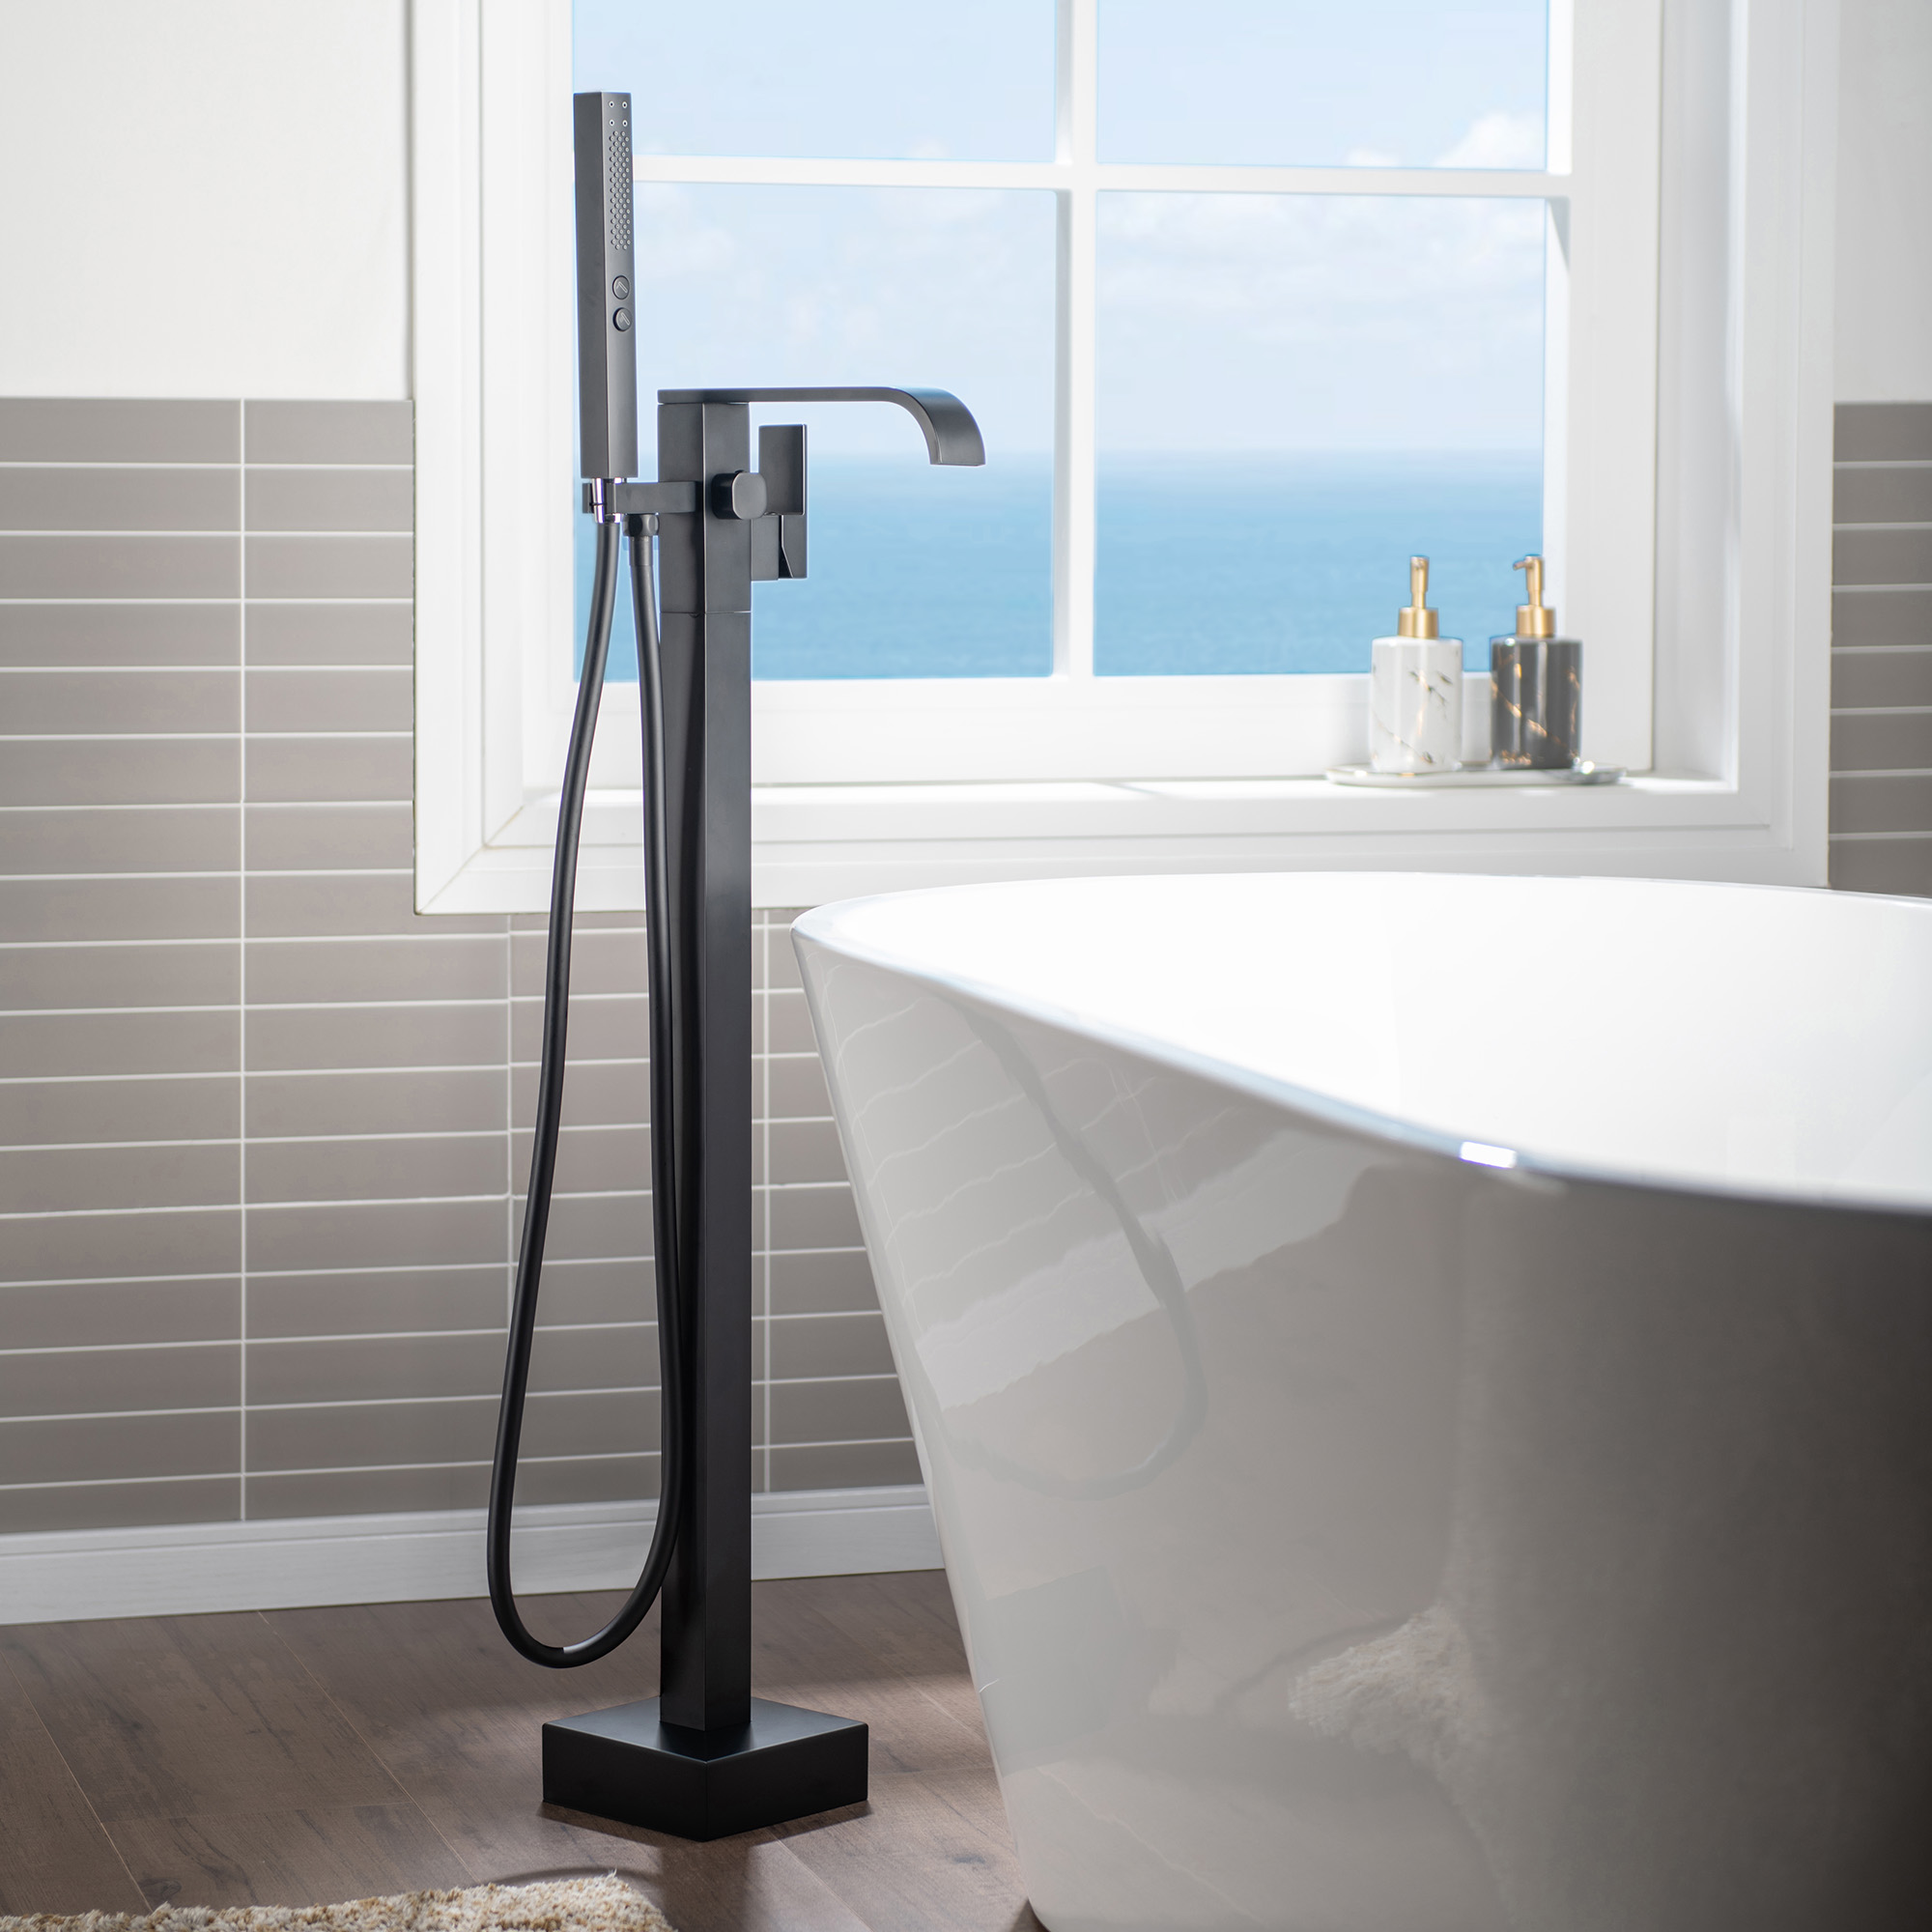 WOODBRIDGE F0037MB Contemporary Single Handle Floor Mount Freestanding Tub Filler Faucet with Hand shower in Matte Black Finish.